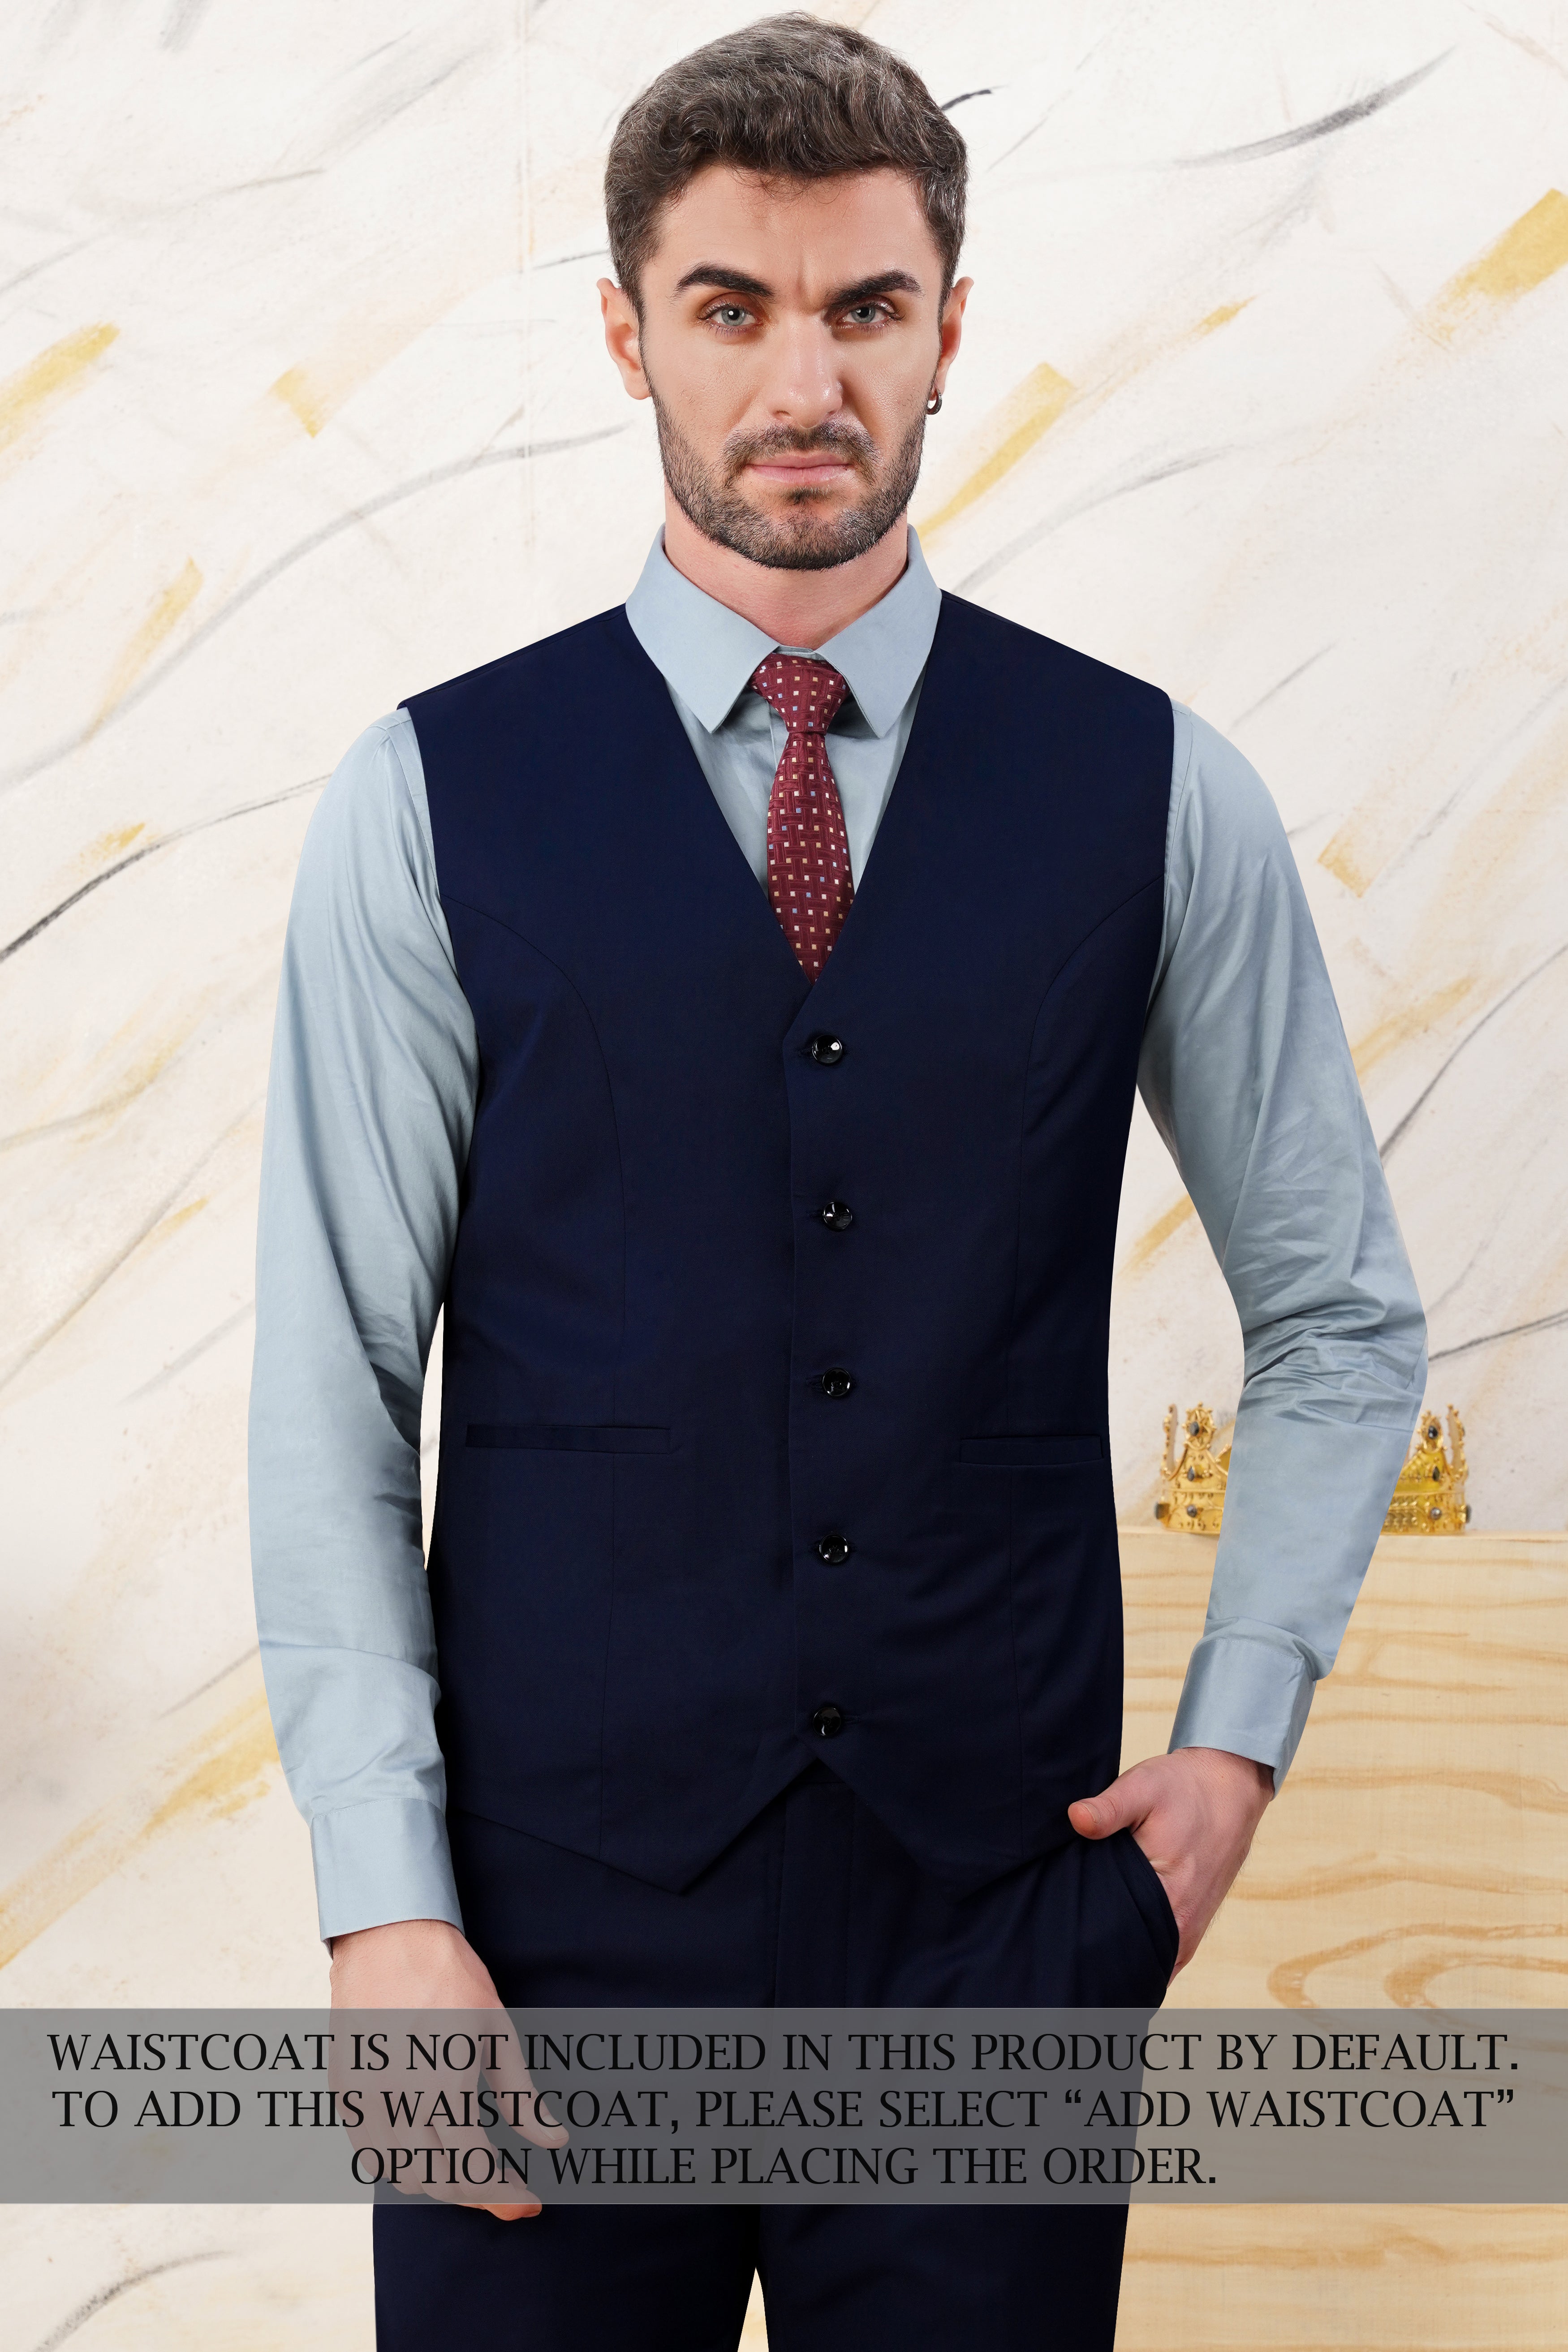 Cinder Blue Wool Rich Double Breasted Sports Suit ST3077-DB-PP-36, ST3077-DB-PP-38, ST3077-DB-PP-40, ST3077-DB-PP-42, ST3077-DB-PP-44, ST3077-DB-PP-46, ST3077-DB-PP-48, ST3077-DB-PP-50, ST3077-DB-PP-52, ST3077-DB-PP-54, ST3077-DB-PP-56, ST3077-DB-PP-58, ST3077-DB-PP-60